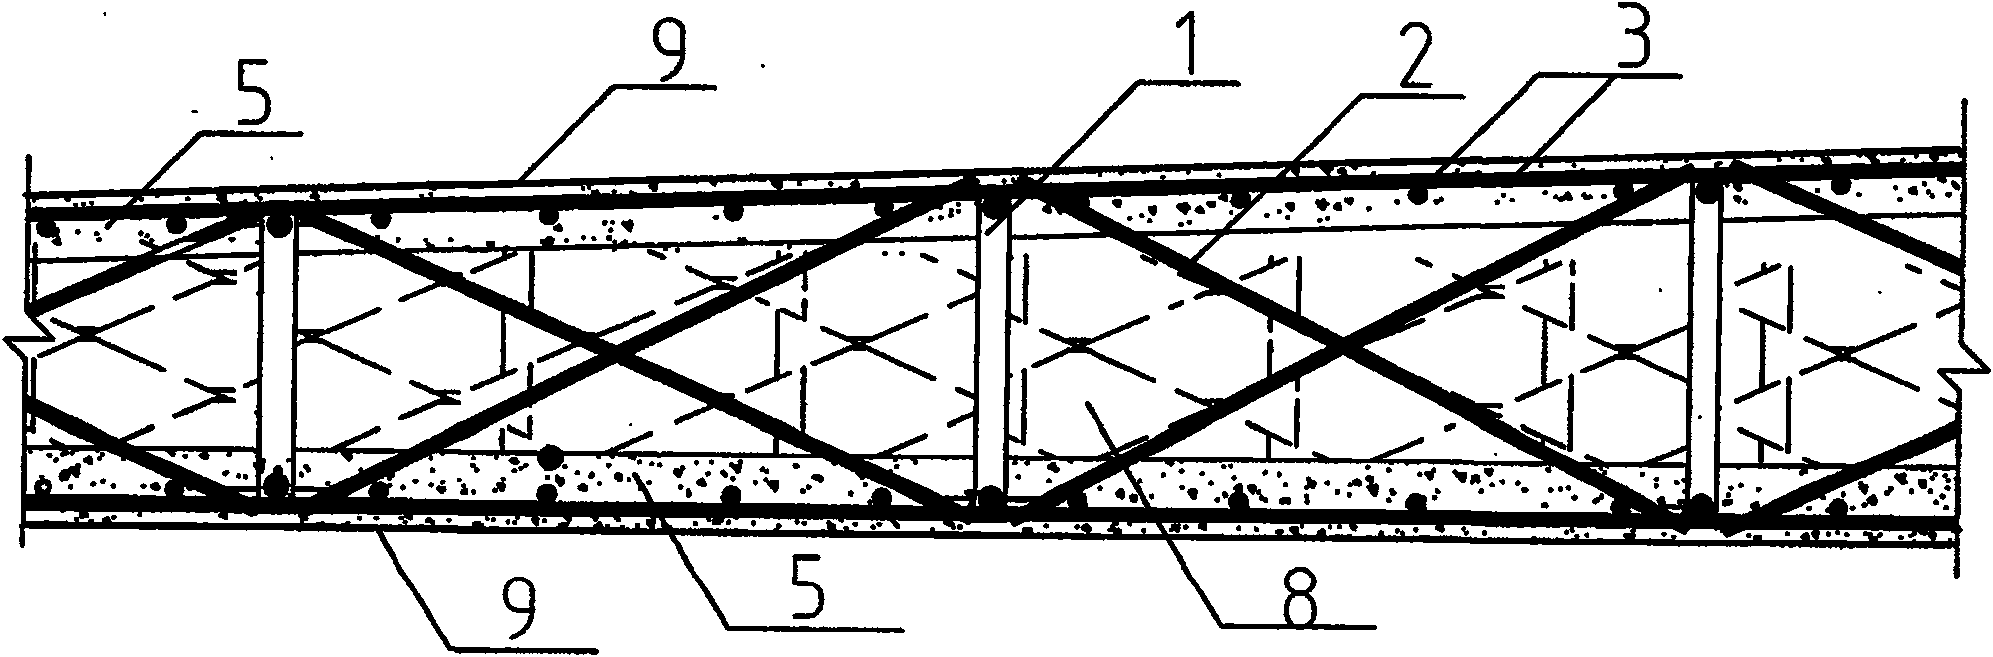 Insulation roof slab and method for making same